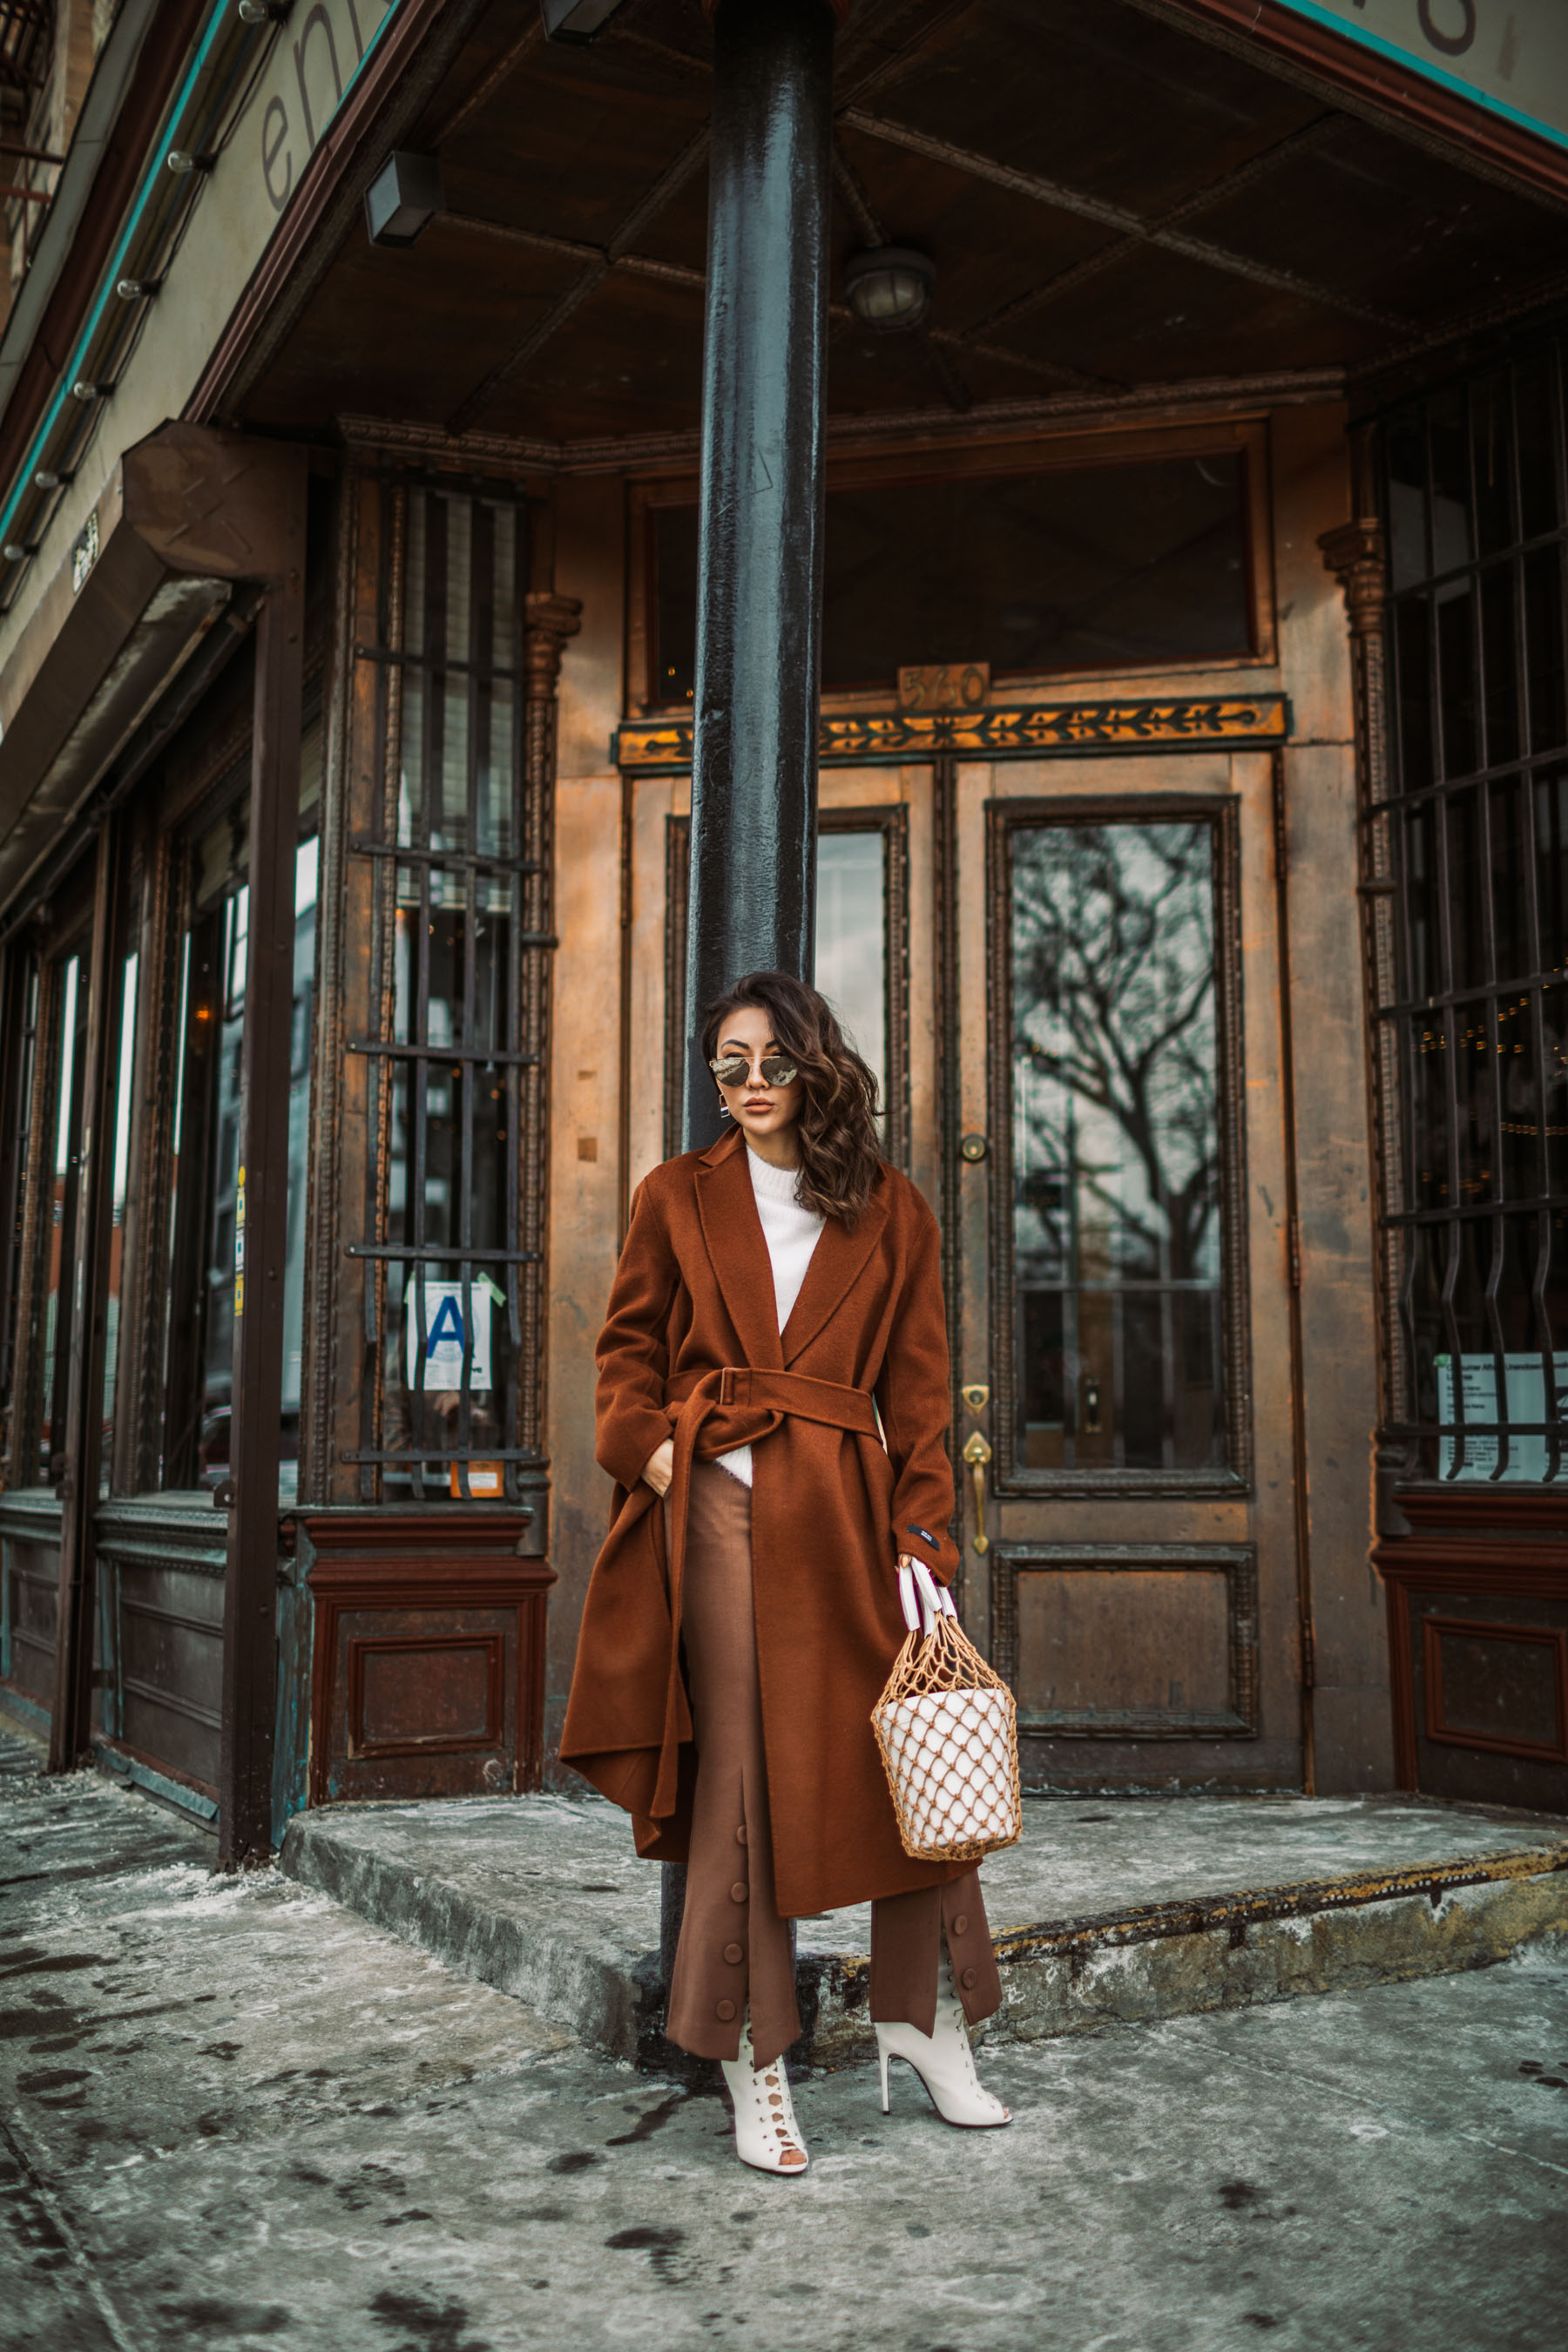 Up and Coming Handbag Brands to Know in 2018 // Notjessfashion.com // staud macrame bag, brown button trousers, wrap coat, robe coat, chic winter outfit, new york fashion blogger, aviator sunglasses, brown monochromatic outfit